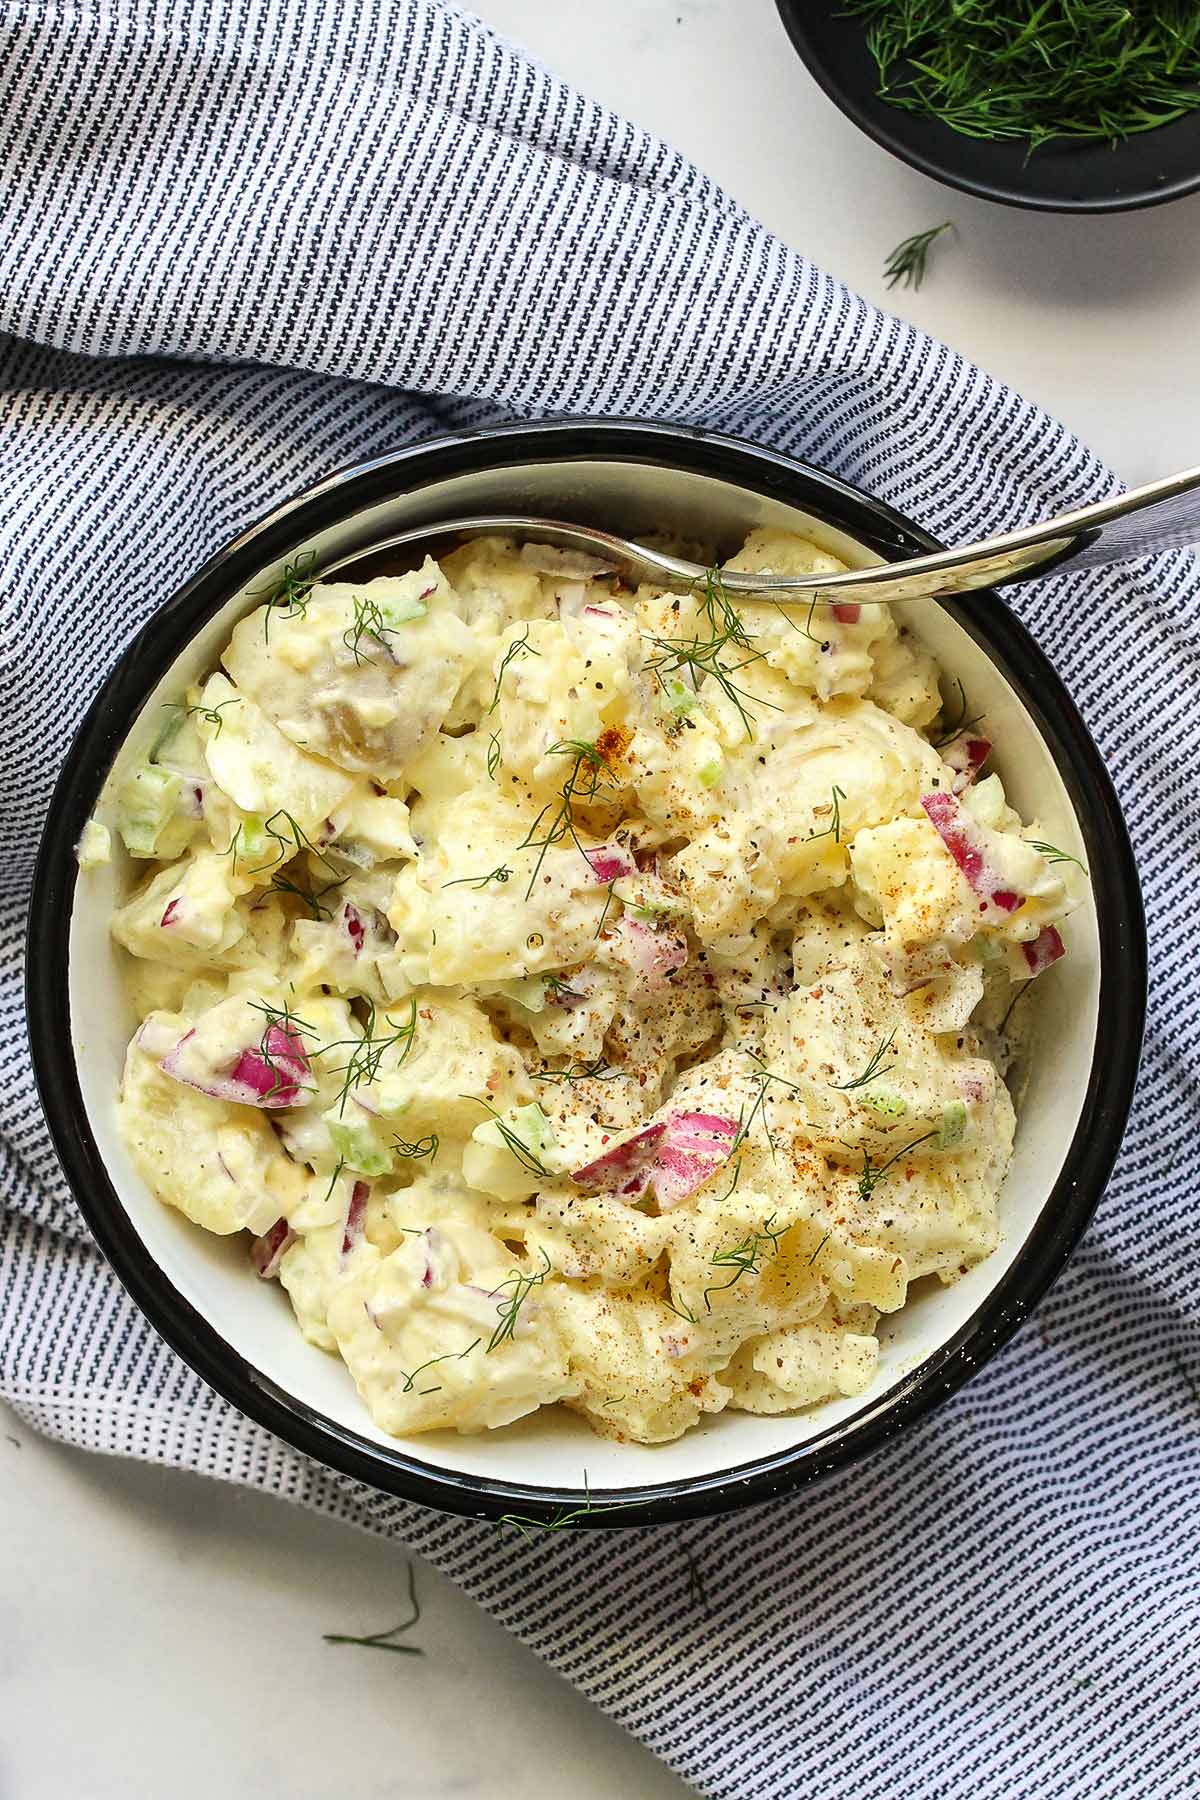 A creamy potato salad topped with fresh dill in white bowl.